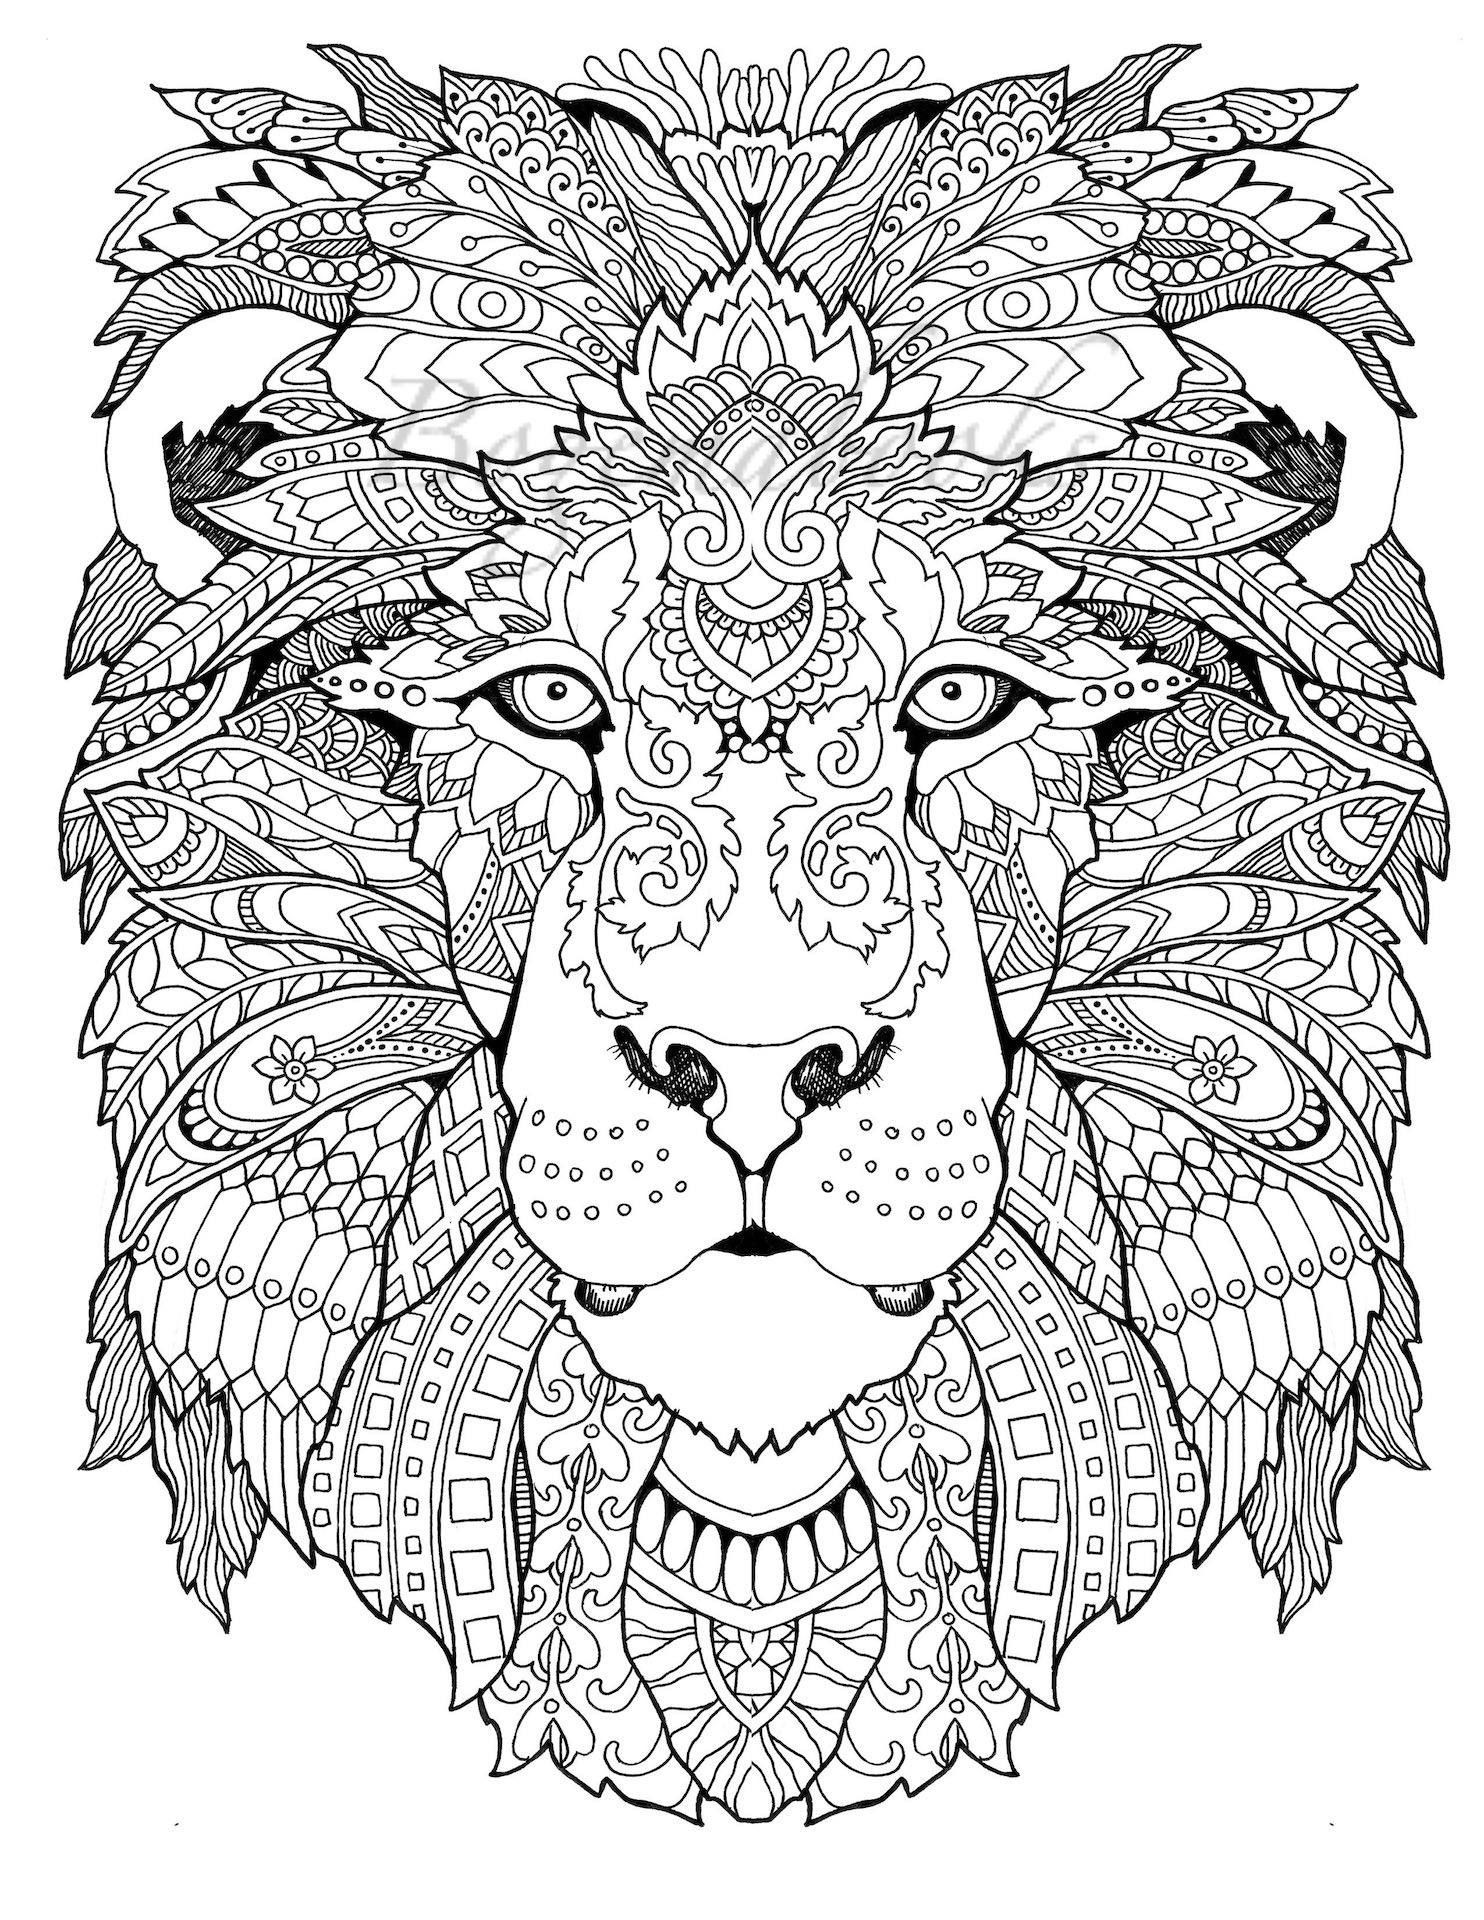 Stress Relief Coloring Pages For Boys
 Awesome Animals Adult Coloring pages Coloring pages